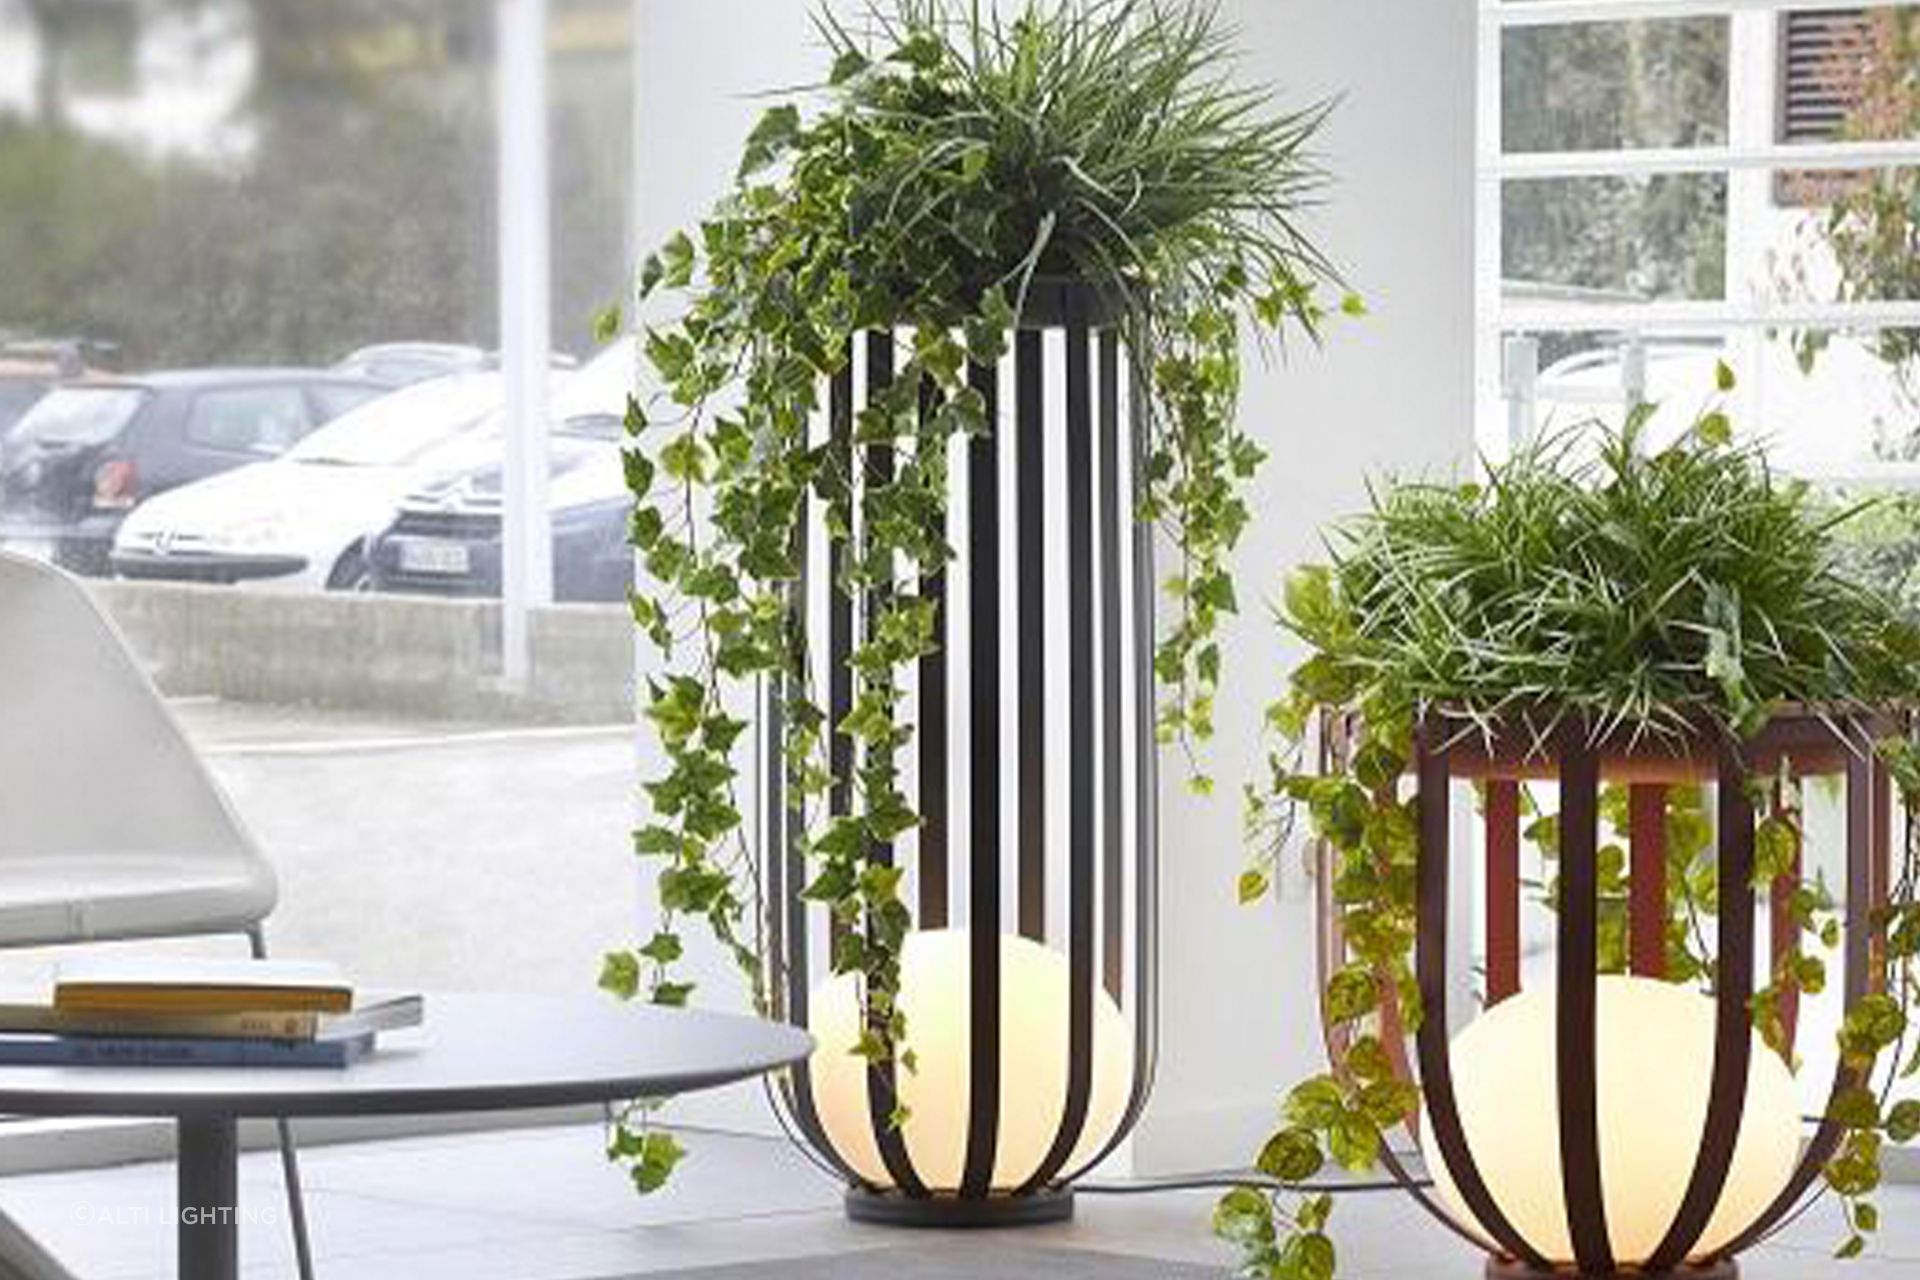 The Bols Tall Outdoor Floor Lamp will illuminate your outdoor space, while keeping your plants safe and secure.